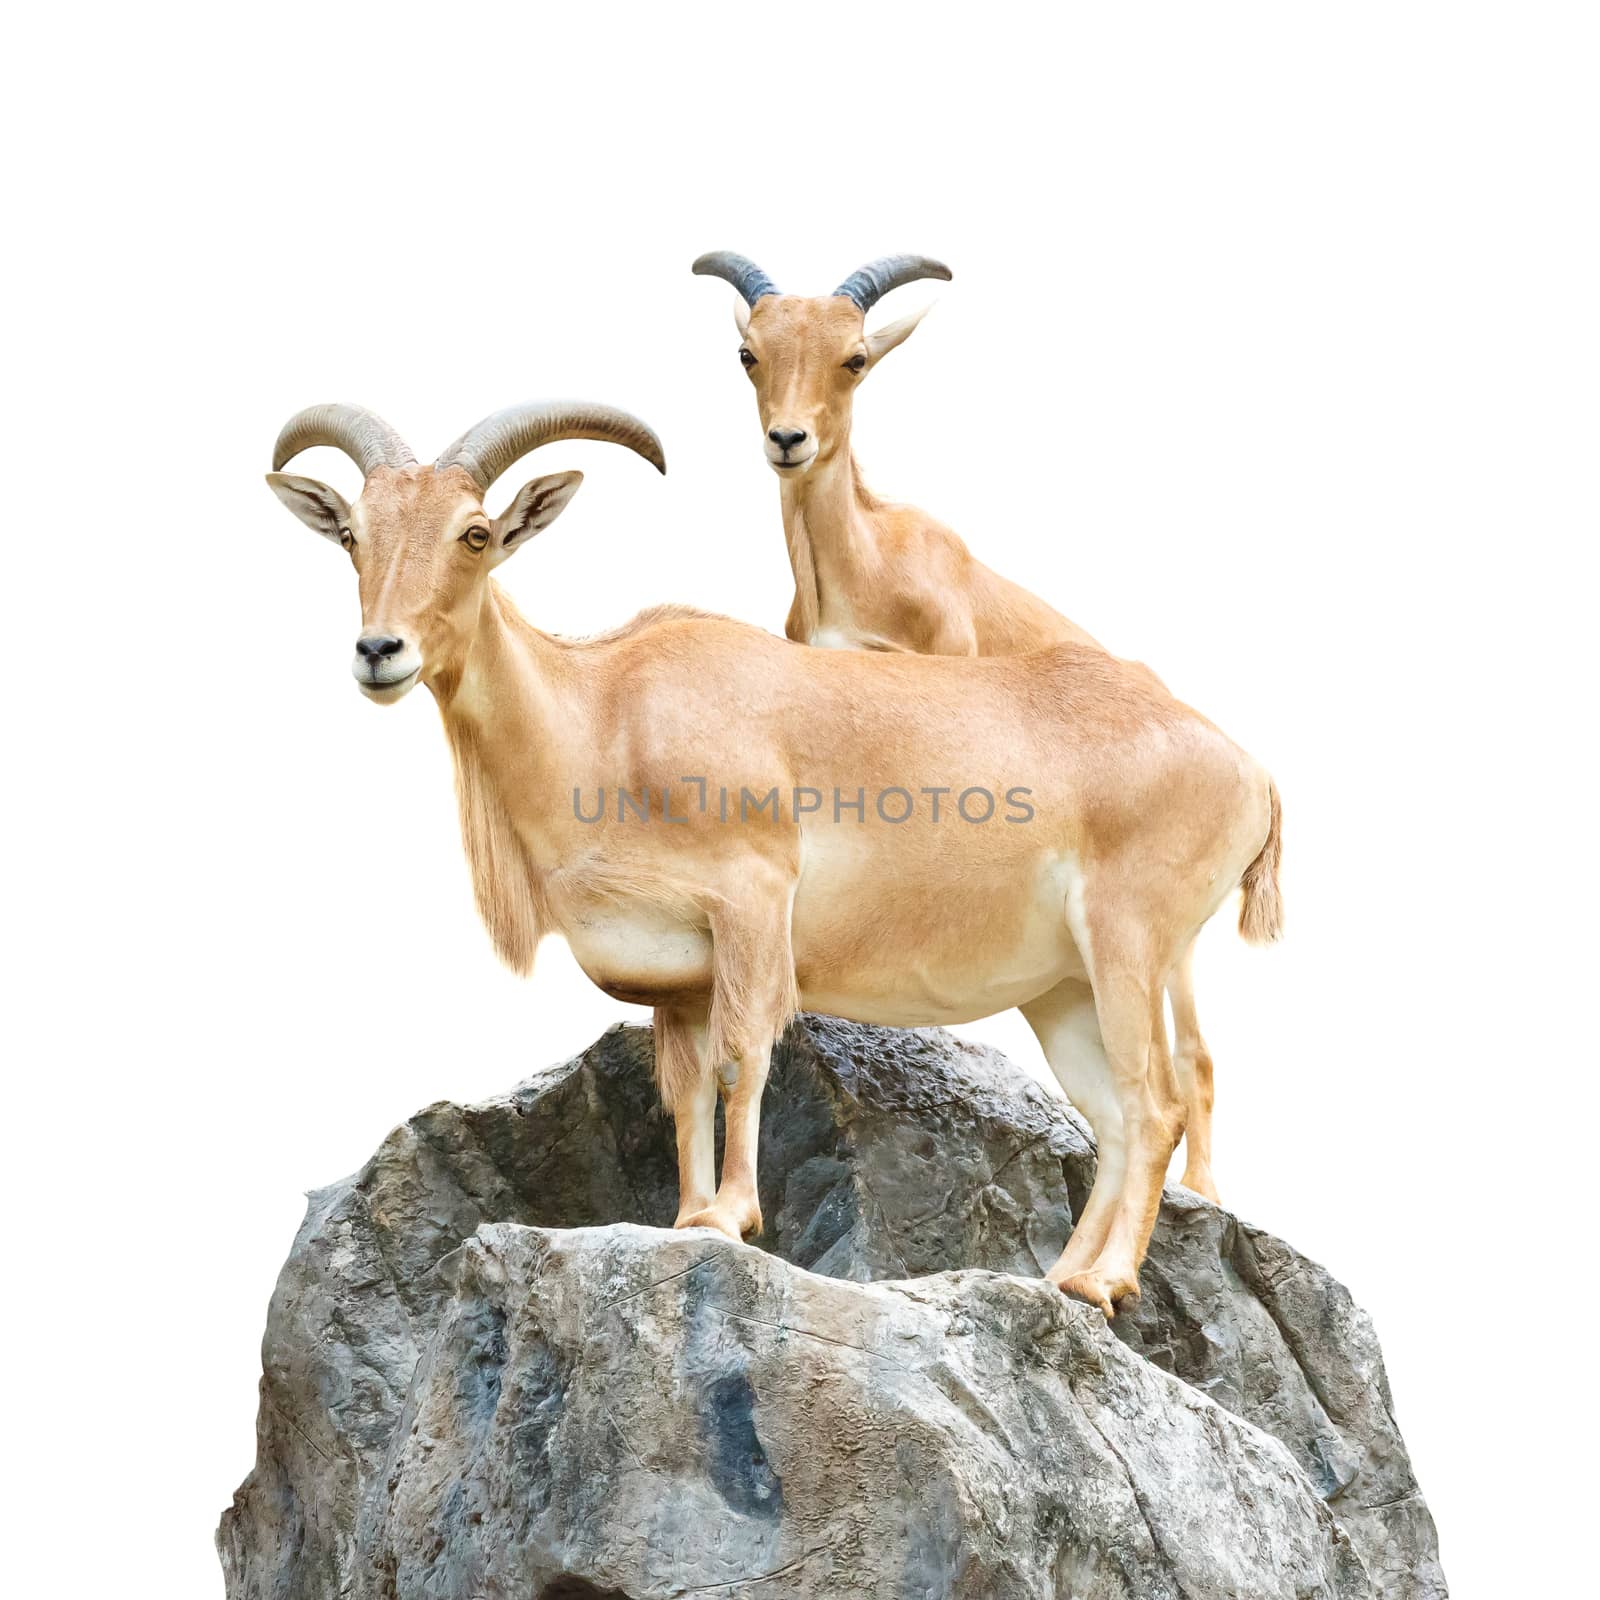 Serow (Mountain Goat , Capricornis sumatraensis) stand on rock at Chiangrai ,Thailand (Isolated) by stockdevil